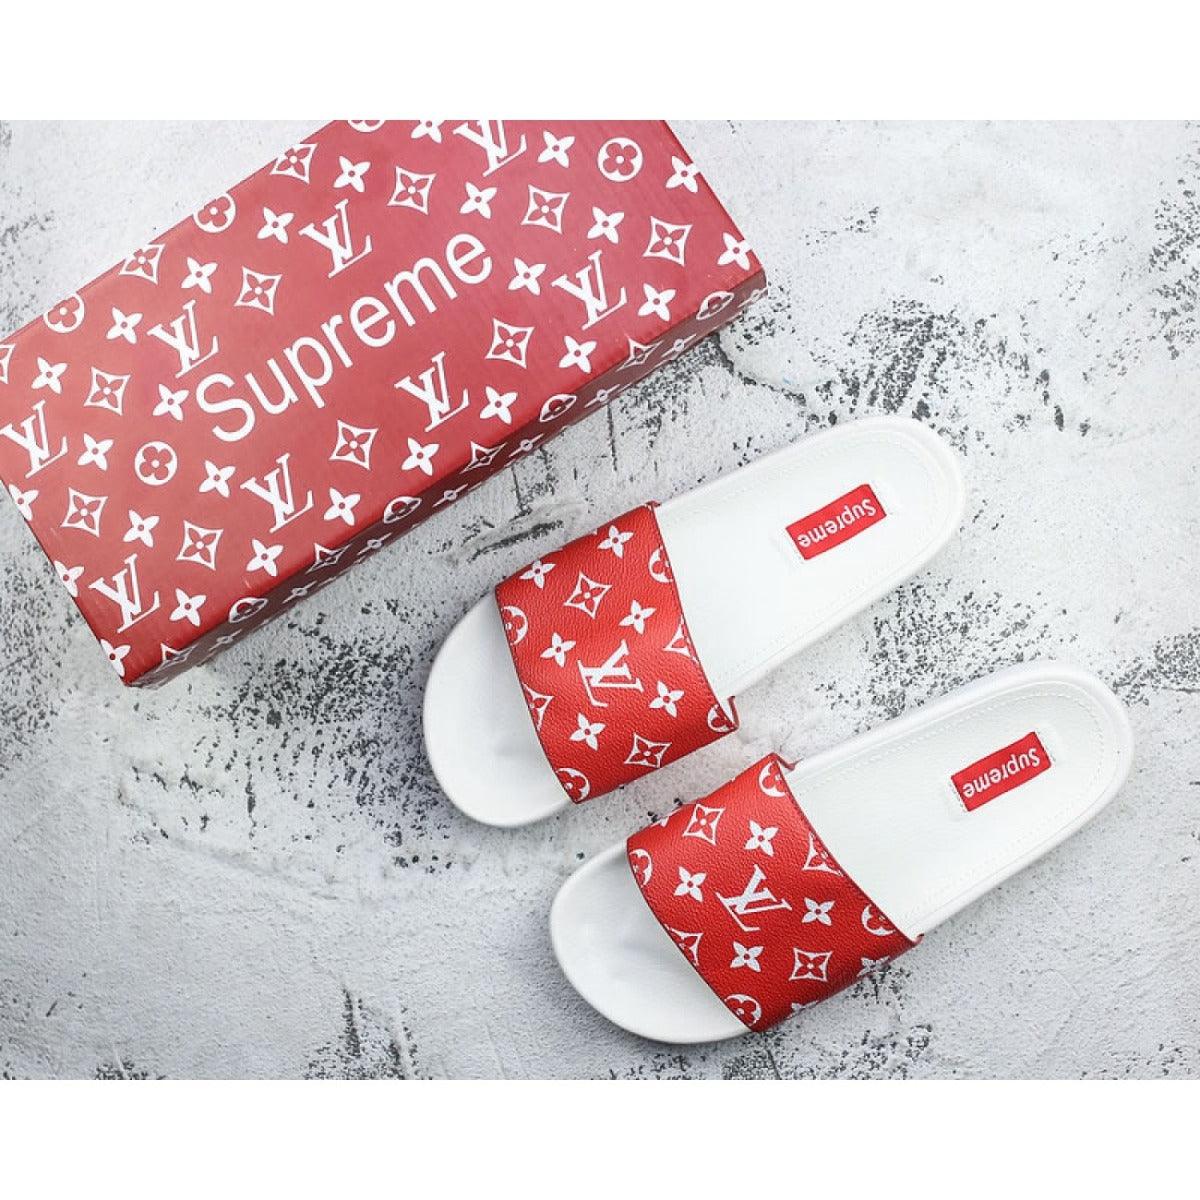 Sup x LV 14ss Slide Sandals Red and White - Obeezi.com